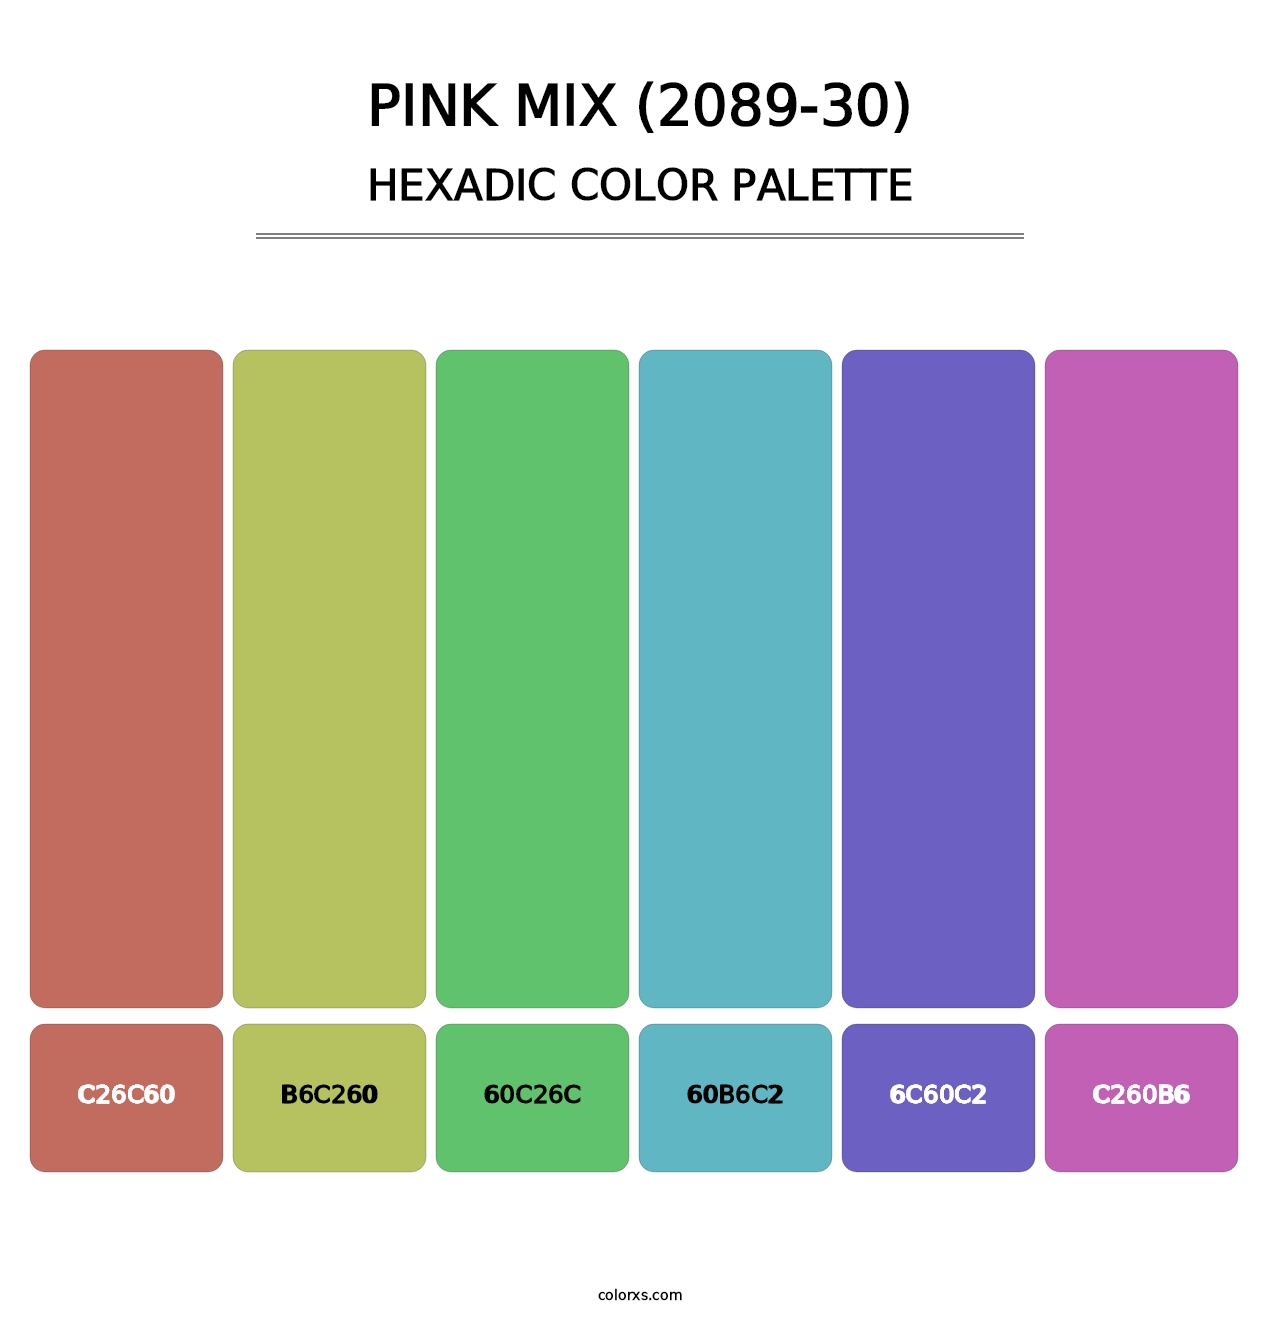 Pink Mix (2089-30) - Hexadic Color Palette